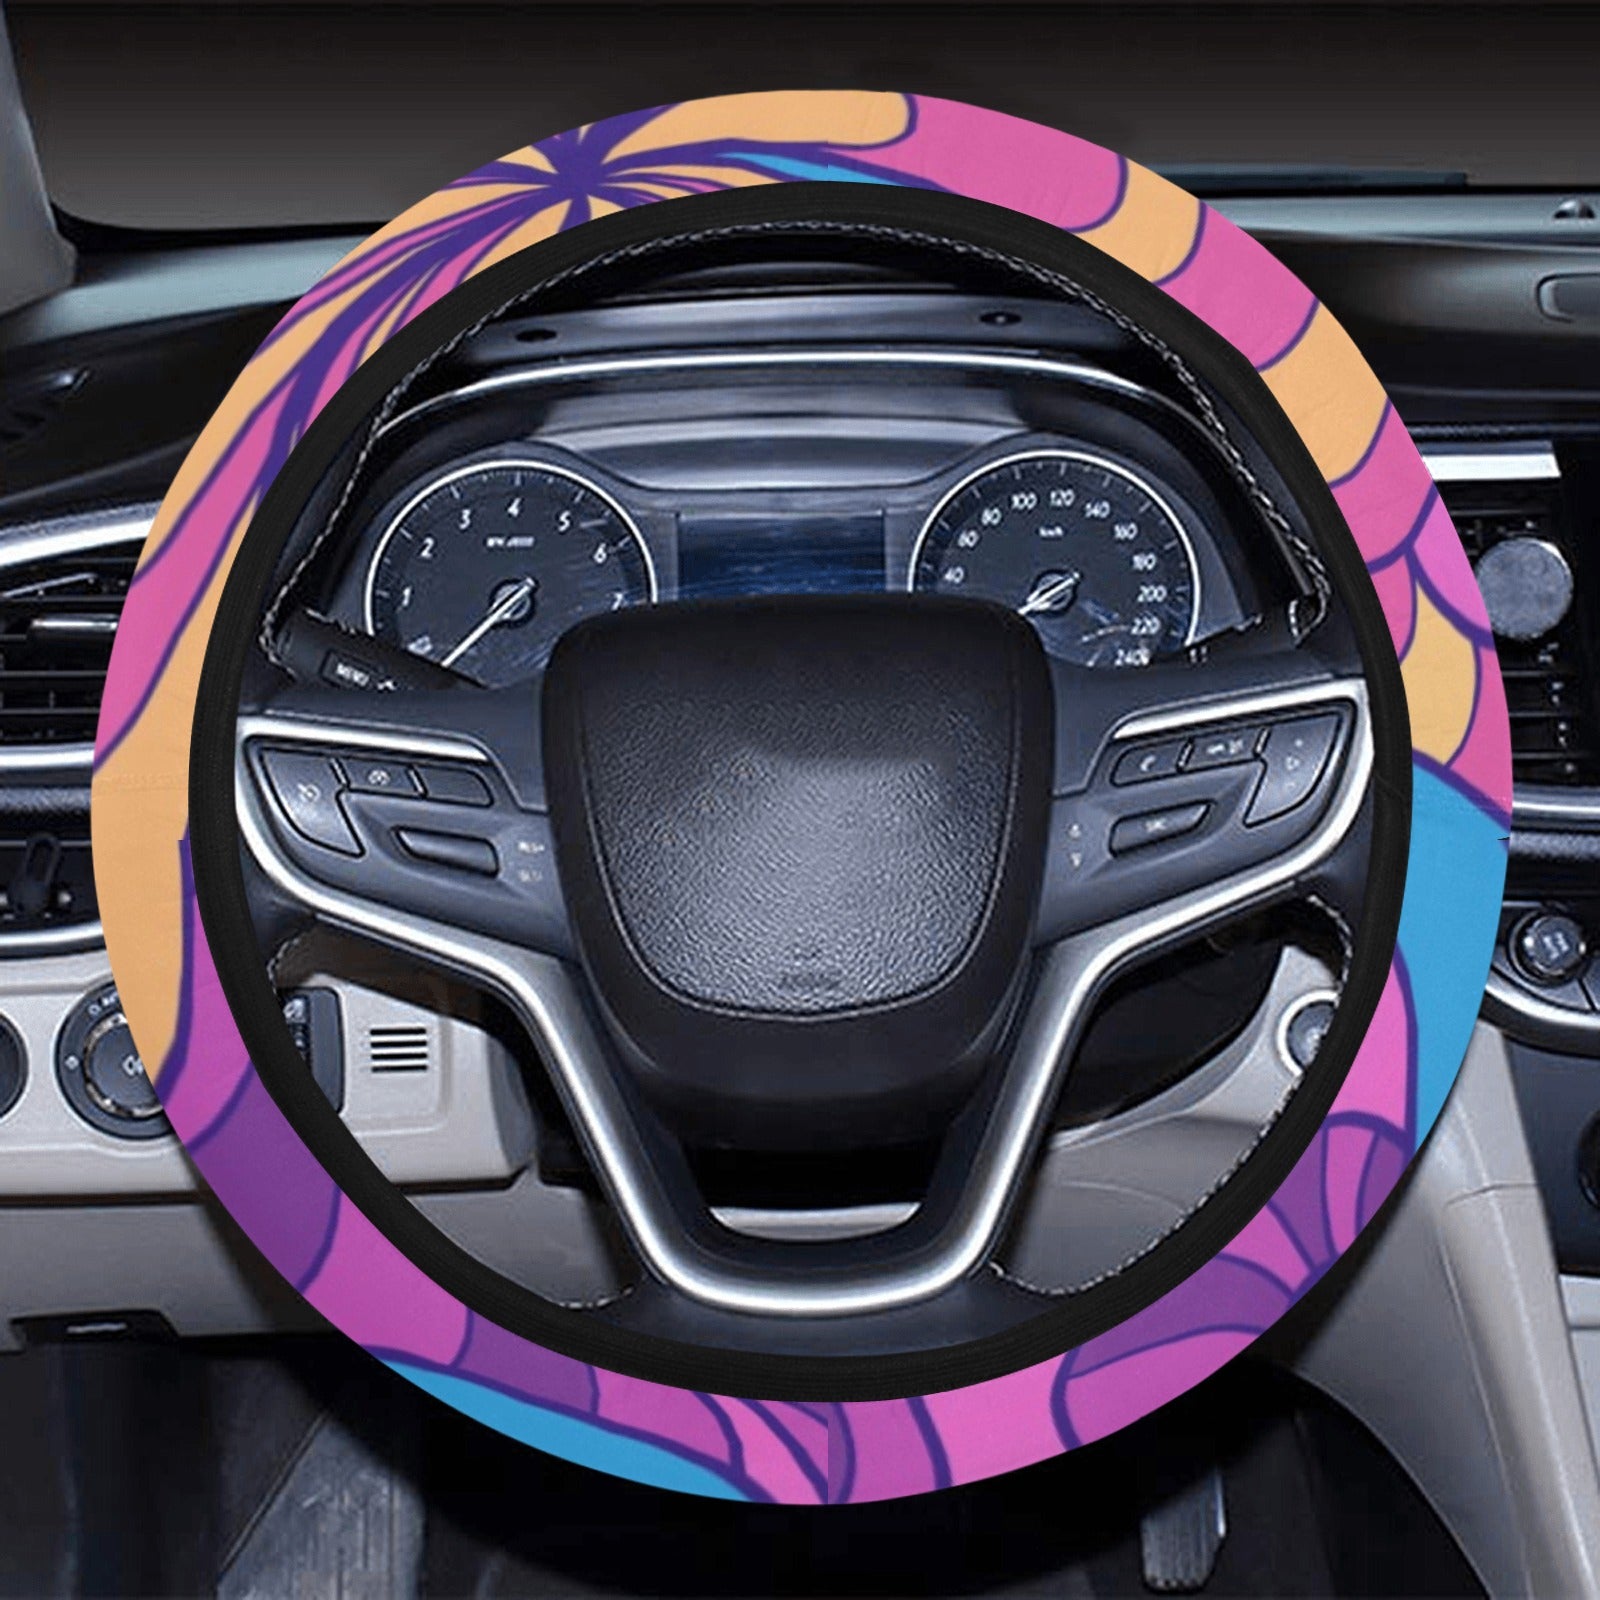 Colorful Psychedelic Decor Steering Wheel Cover